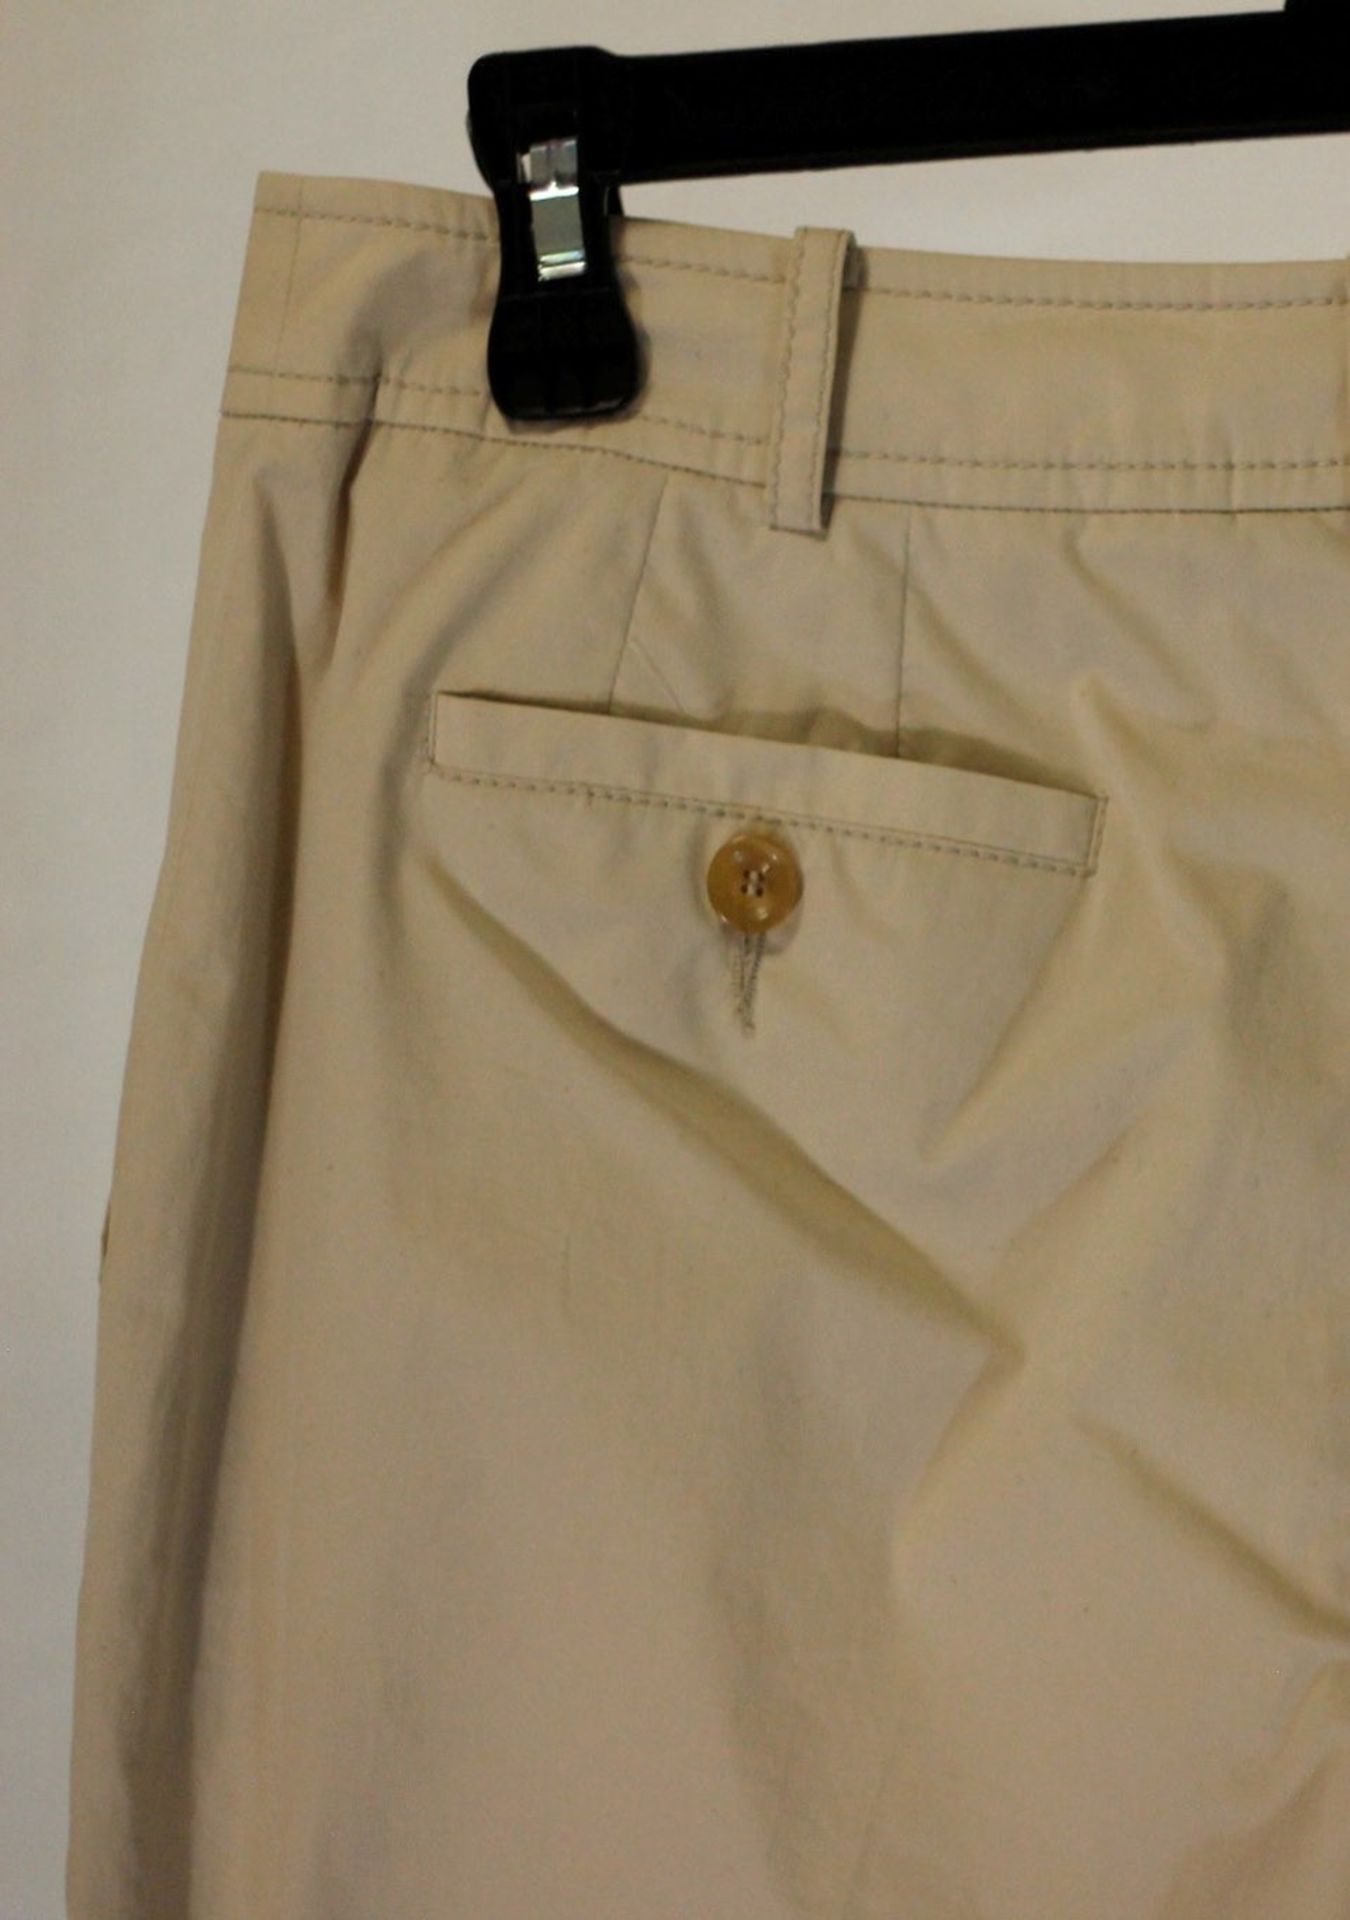 1 x Agnona Beige Trousers - Size: 14 - Material: 97% Cotton, 3% Elastane. Lining 100% Cupro - From a - Image 3 of 8